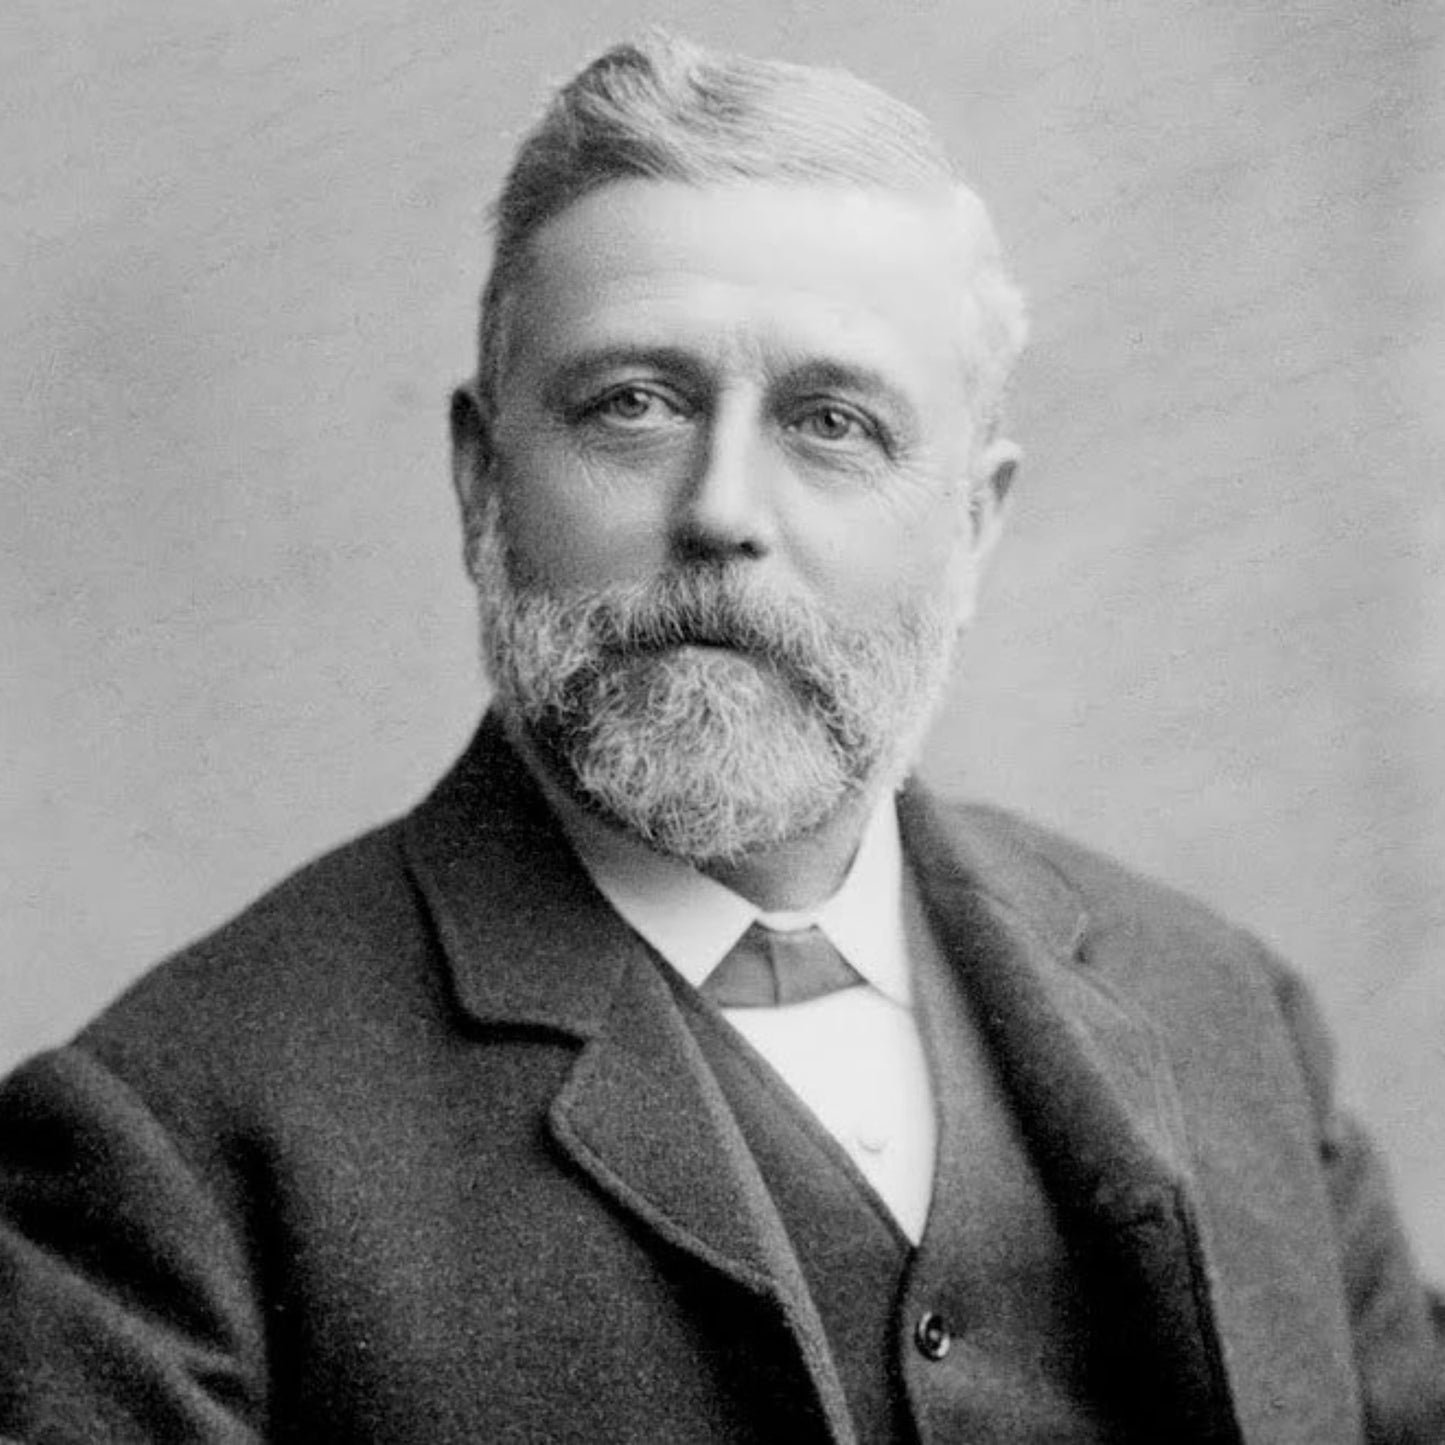 Yorkshireman Thomas Crapper: The Inventor of the Modern Toilet